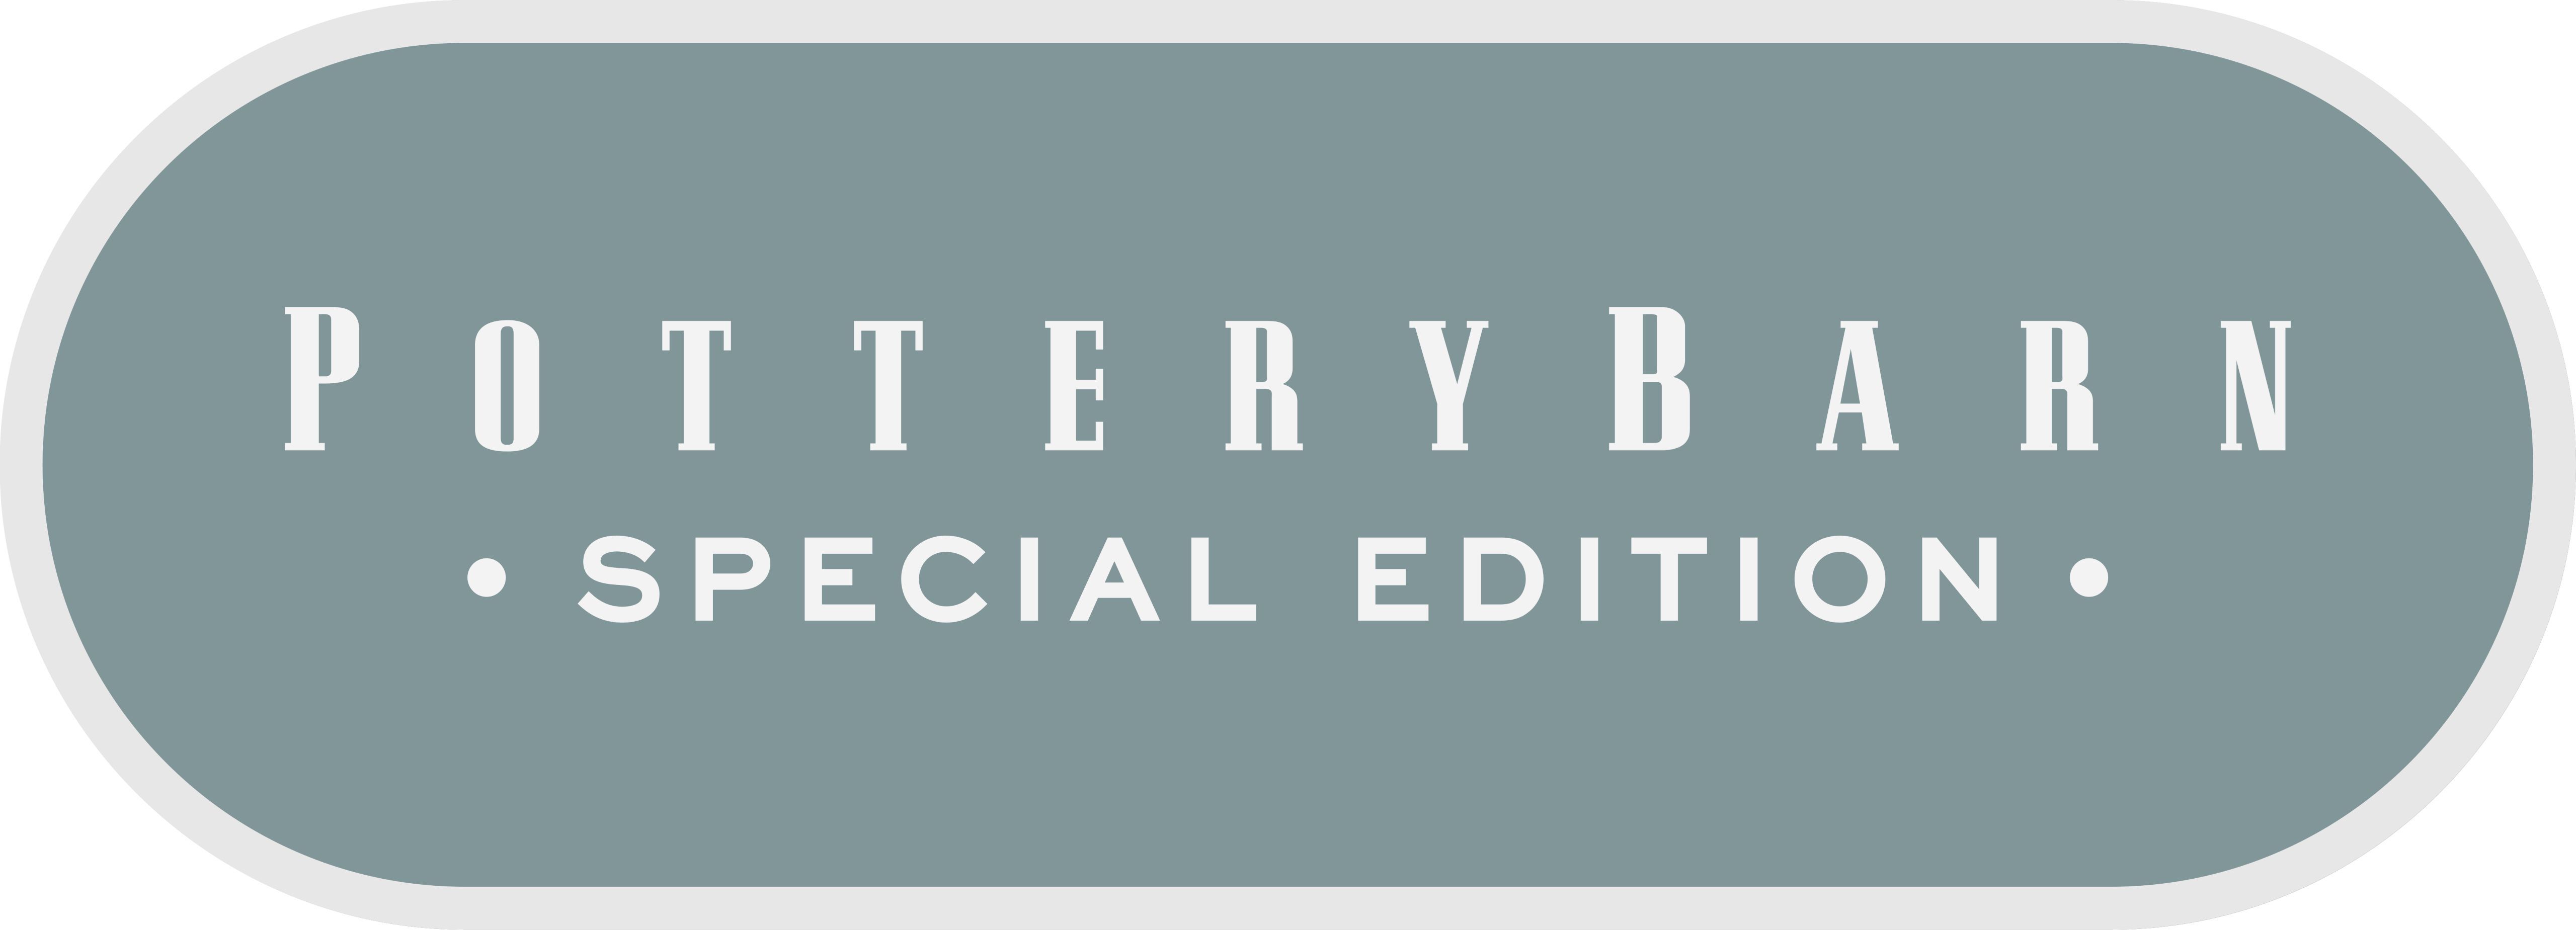 Pottery Barn Special Edition